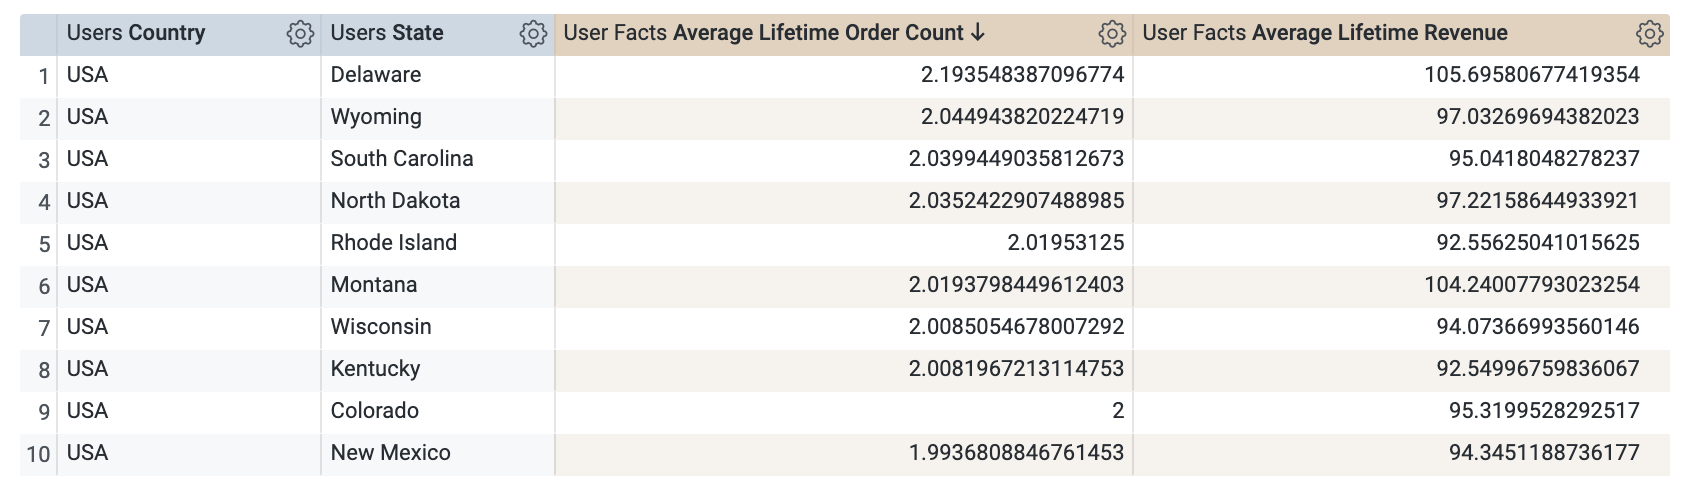 The results table displaying 10 rows of data for Users country, Users state, Average Lifetime Order Count, and Average Lifetime Revenue measures